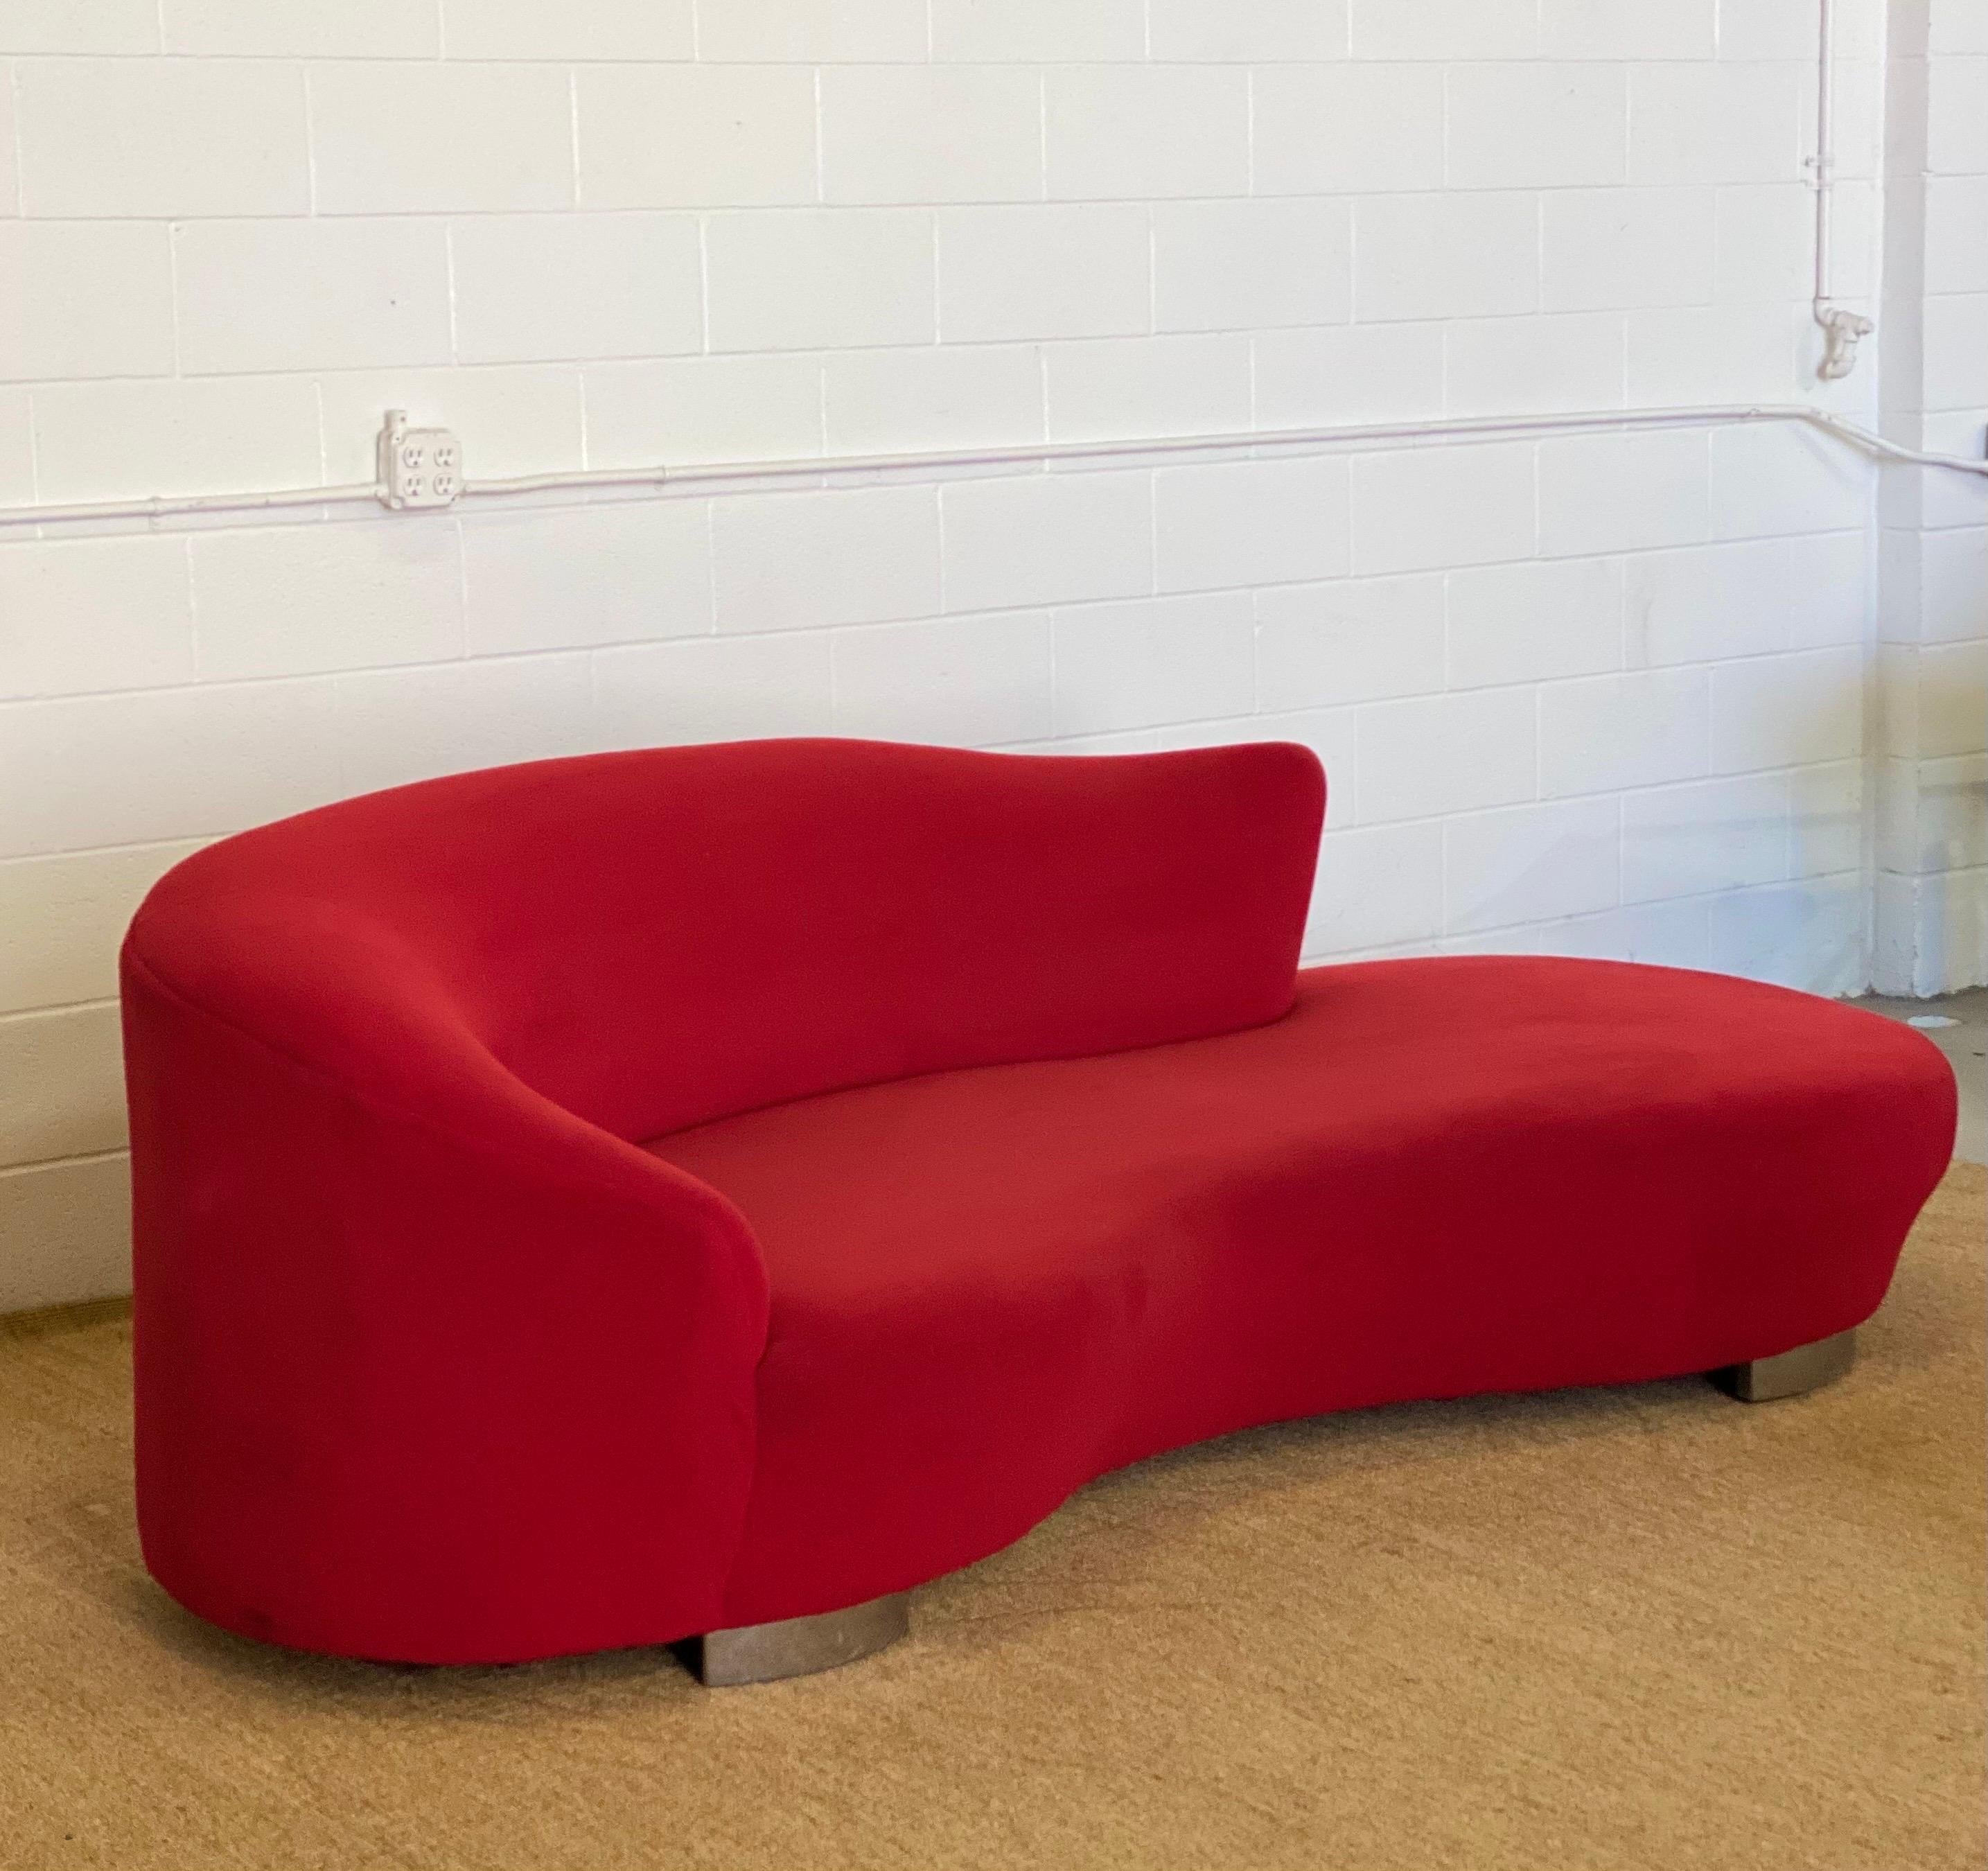 1980s Vintage Curved Cloud Red Sofa For Sale 2